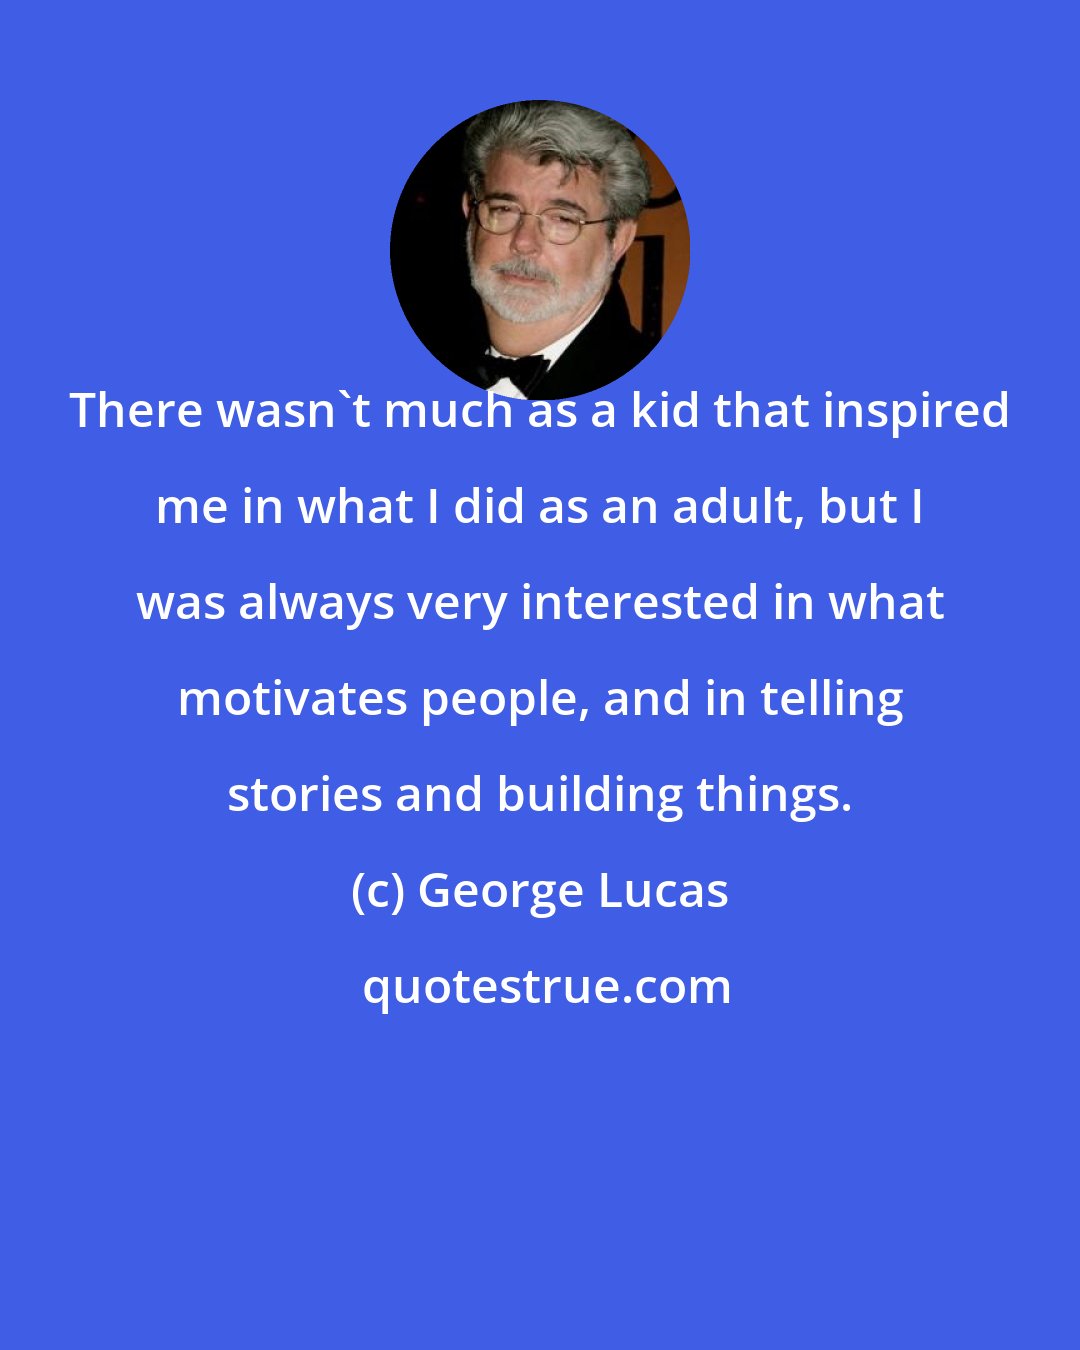 George Lucas: There wasn't much as a kid that inspired me in what I did as an adult, but I was always very interested in what motivates people, and in telling stories and building things.